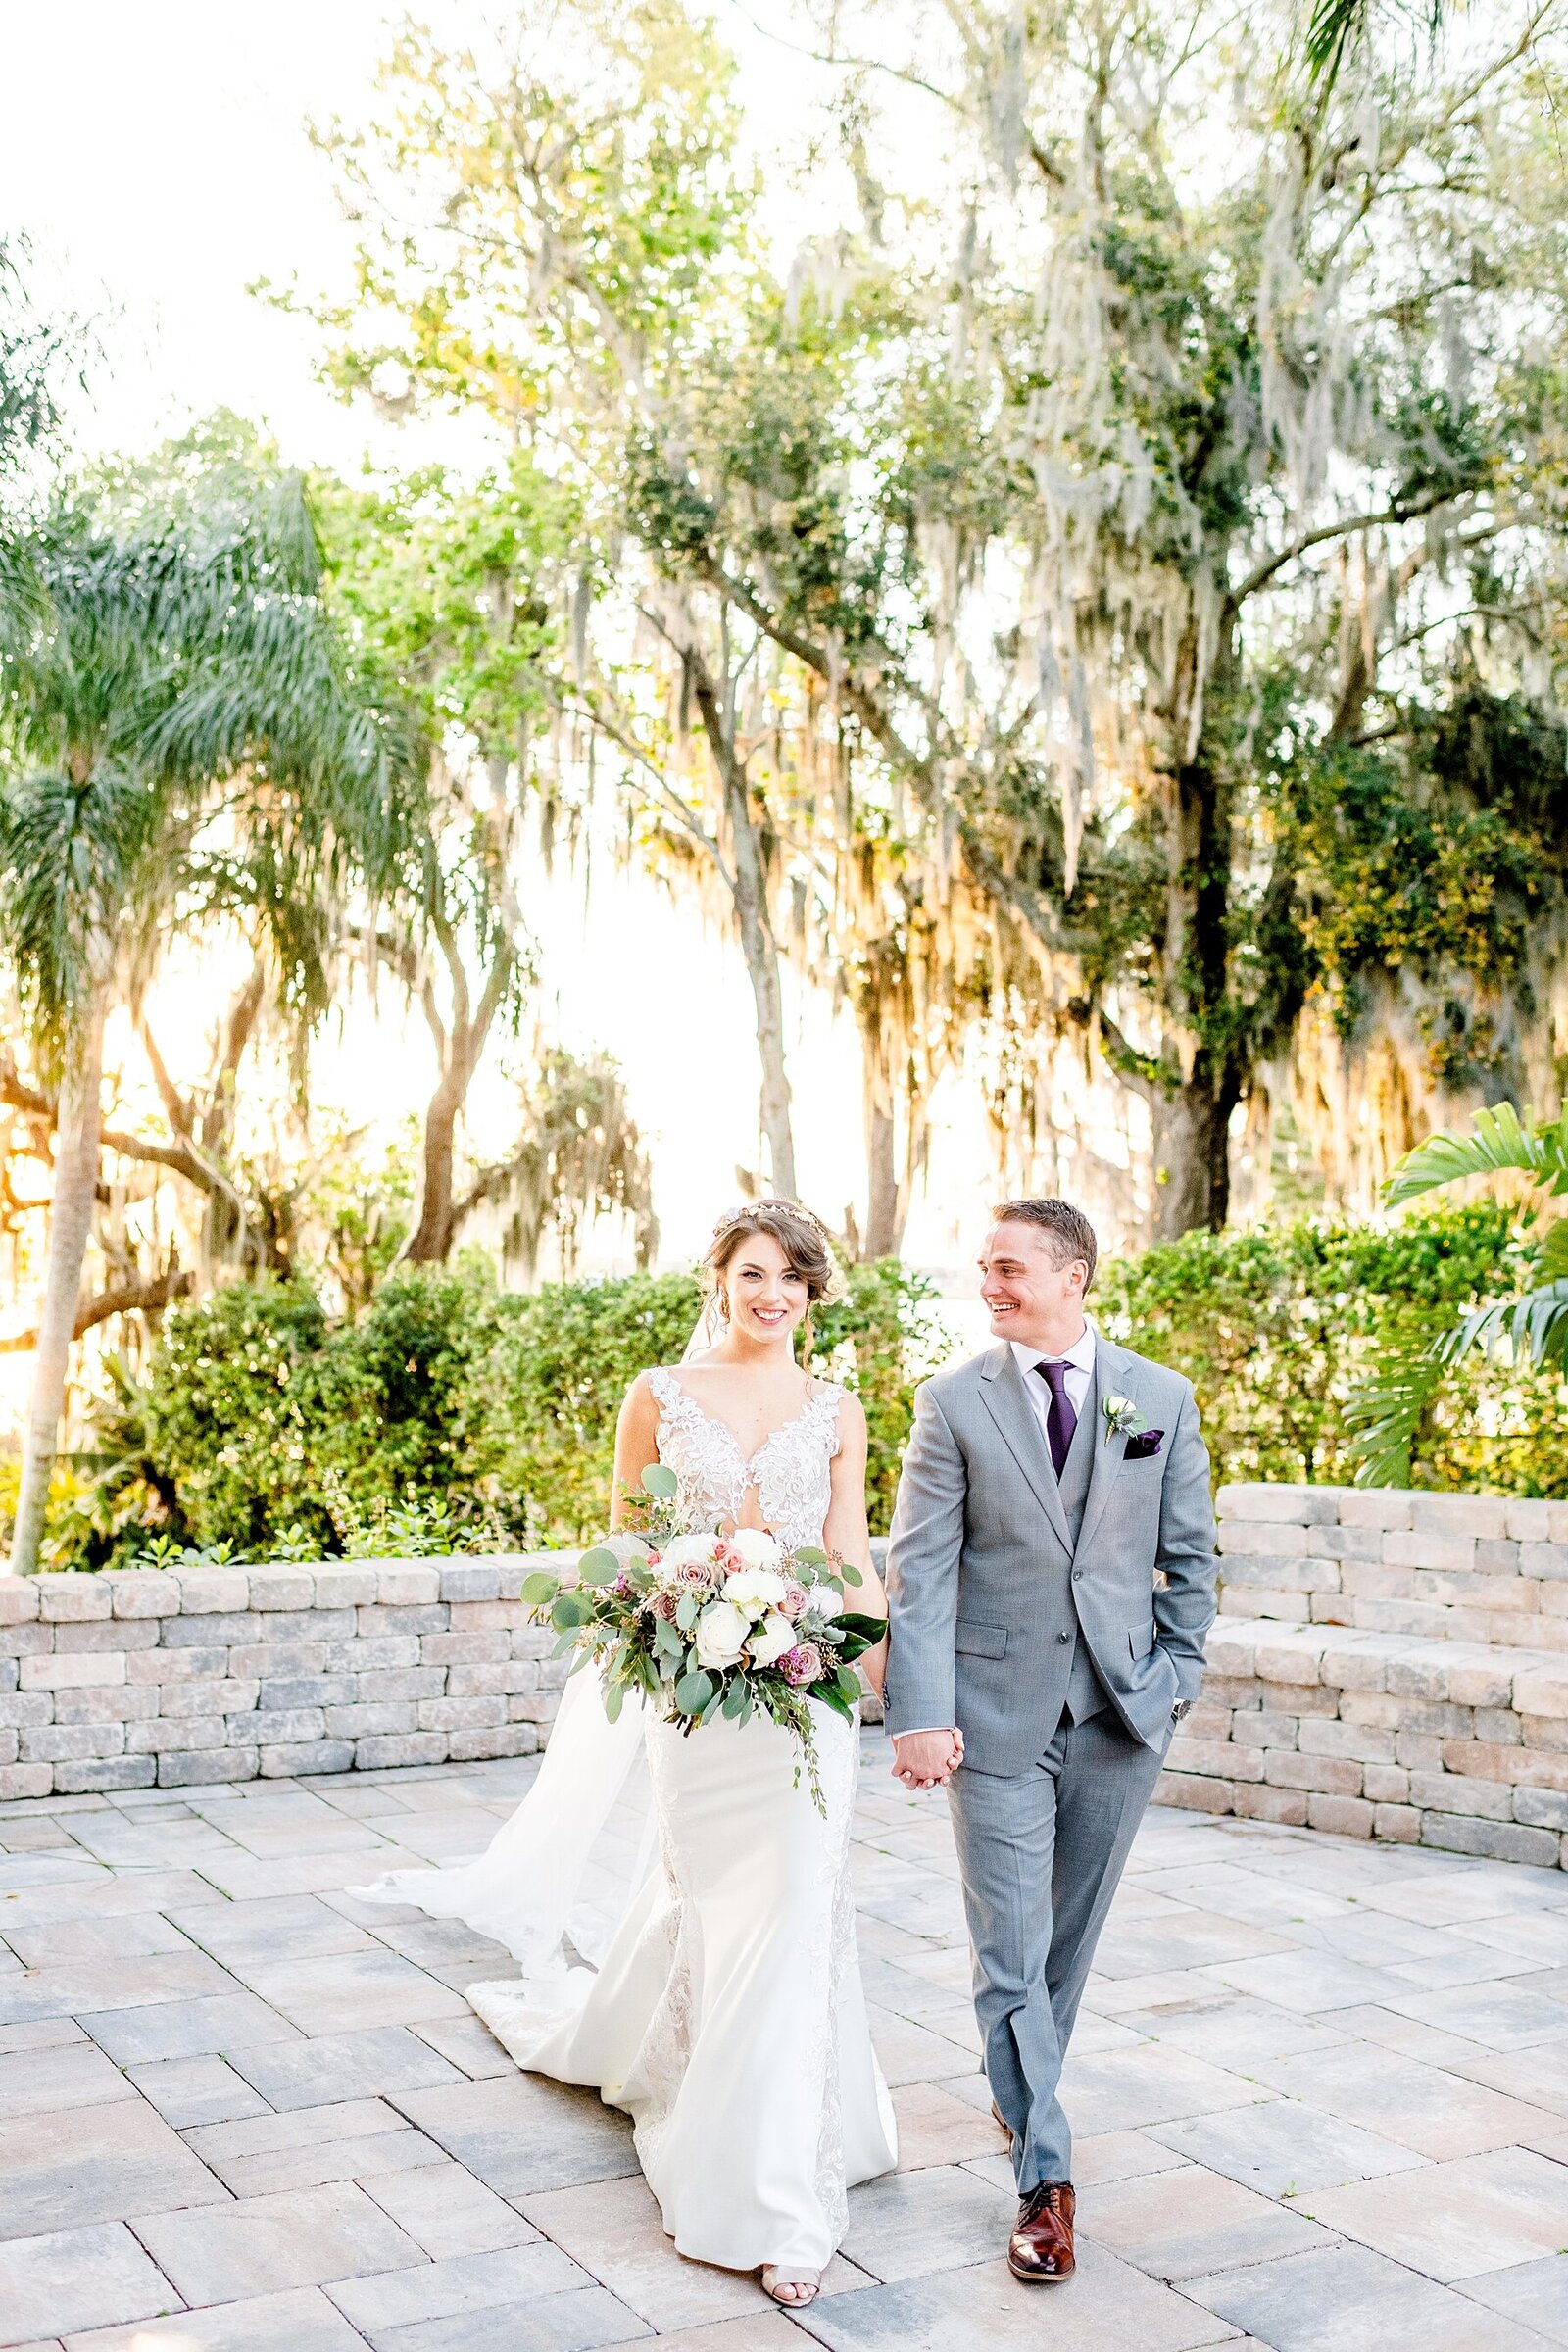 Wedding Gown | Town Manor | Chynna Pacheco Photography